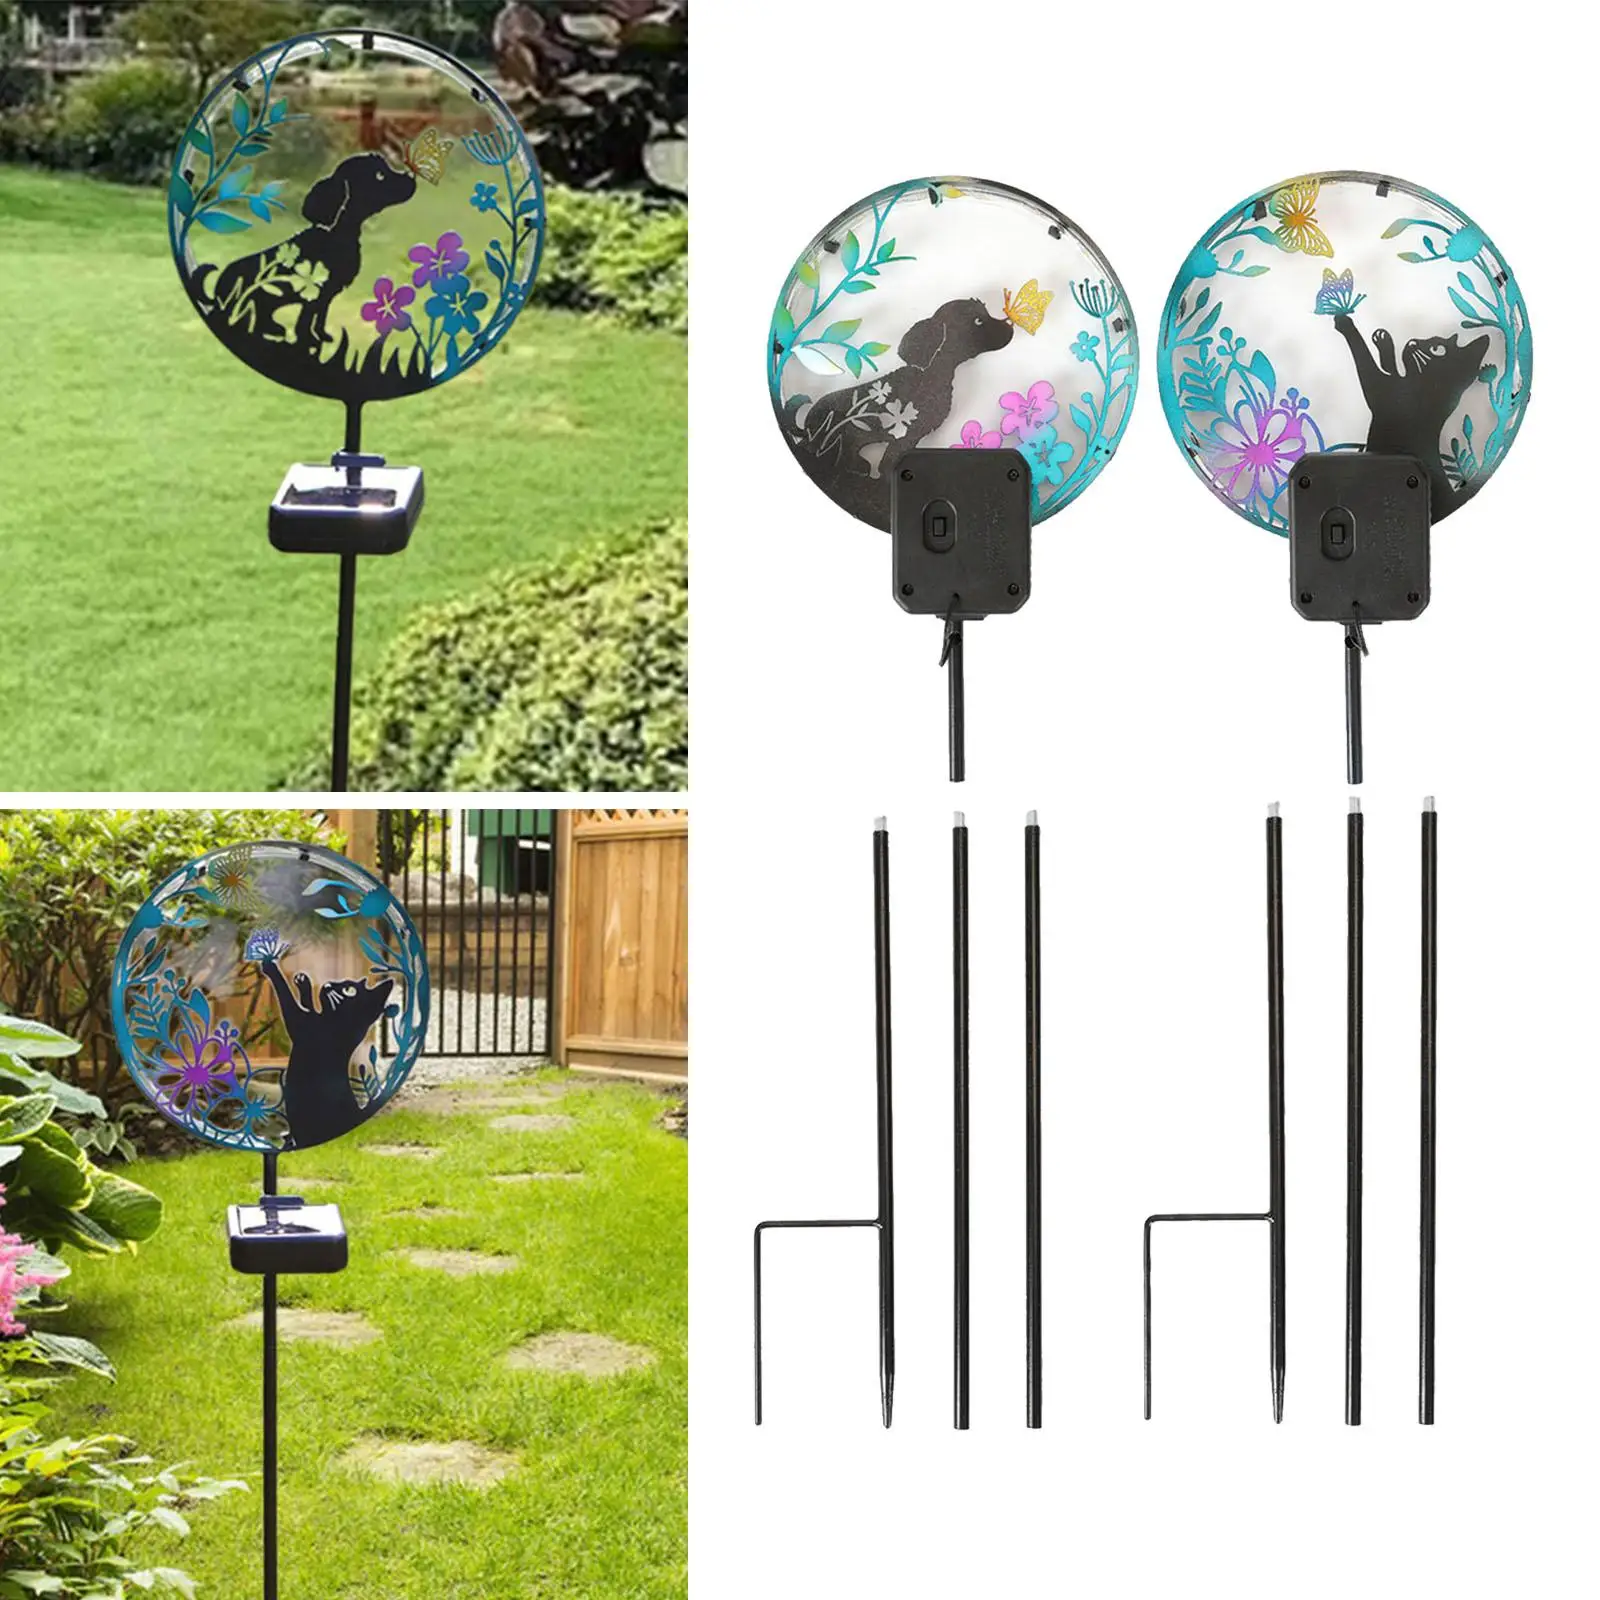 Garden Stake Light Cute Animal Picture Landscape Lighting Solar Pathway Lights LED Lights for Balcony Yard Garden Pathway Lawn